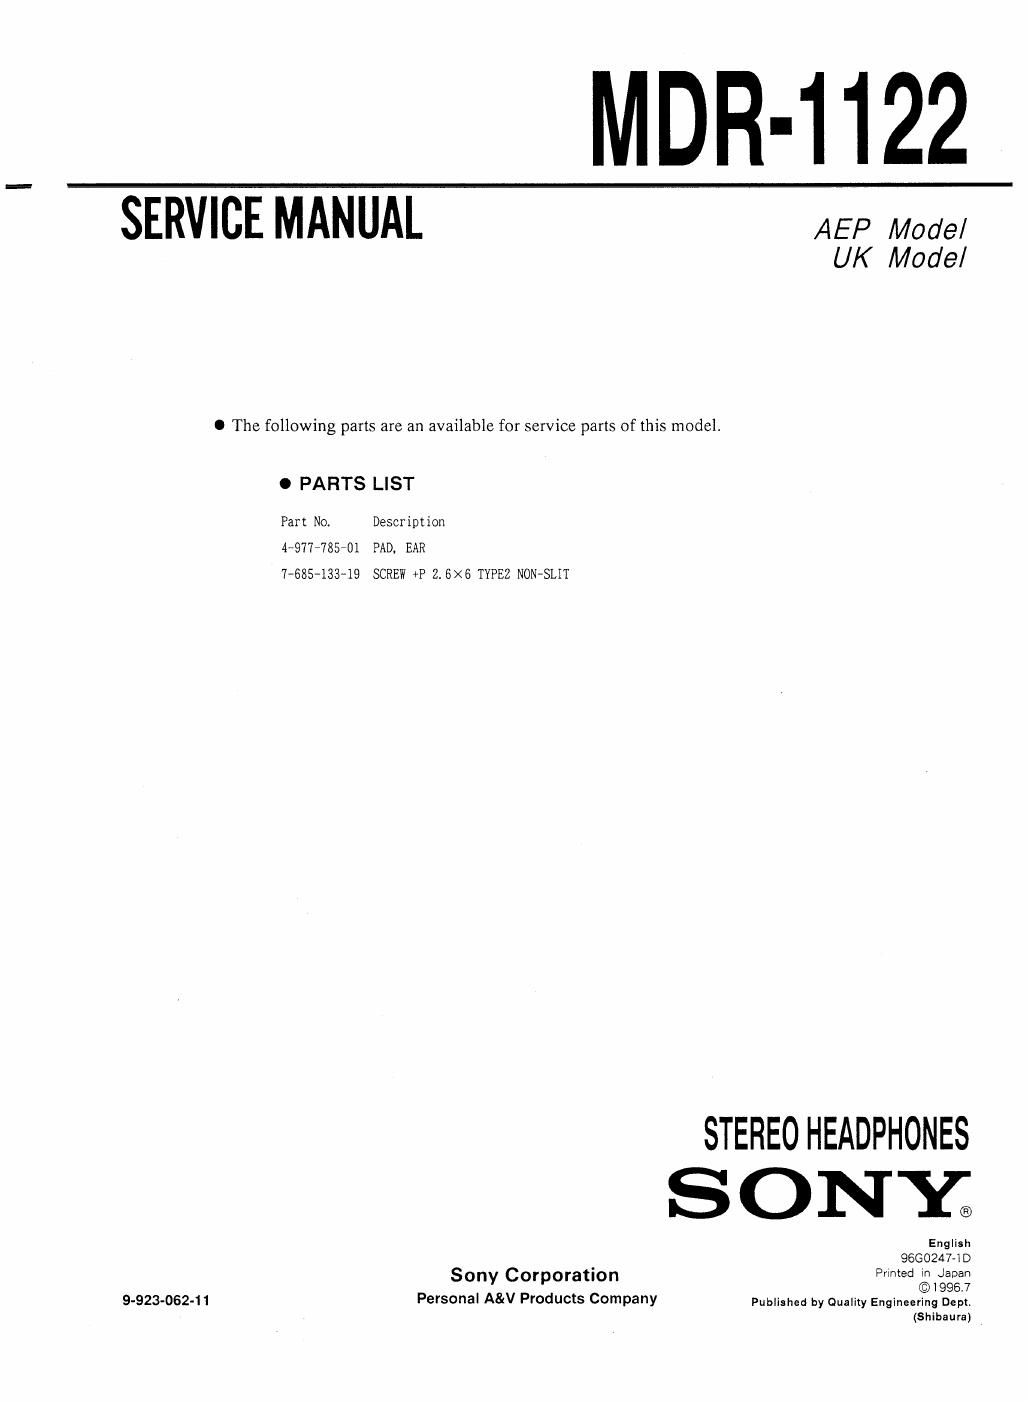 sony mdr 1122 service manual